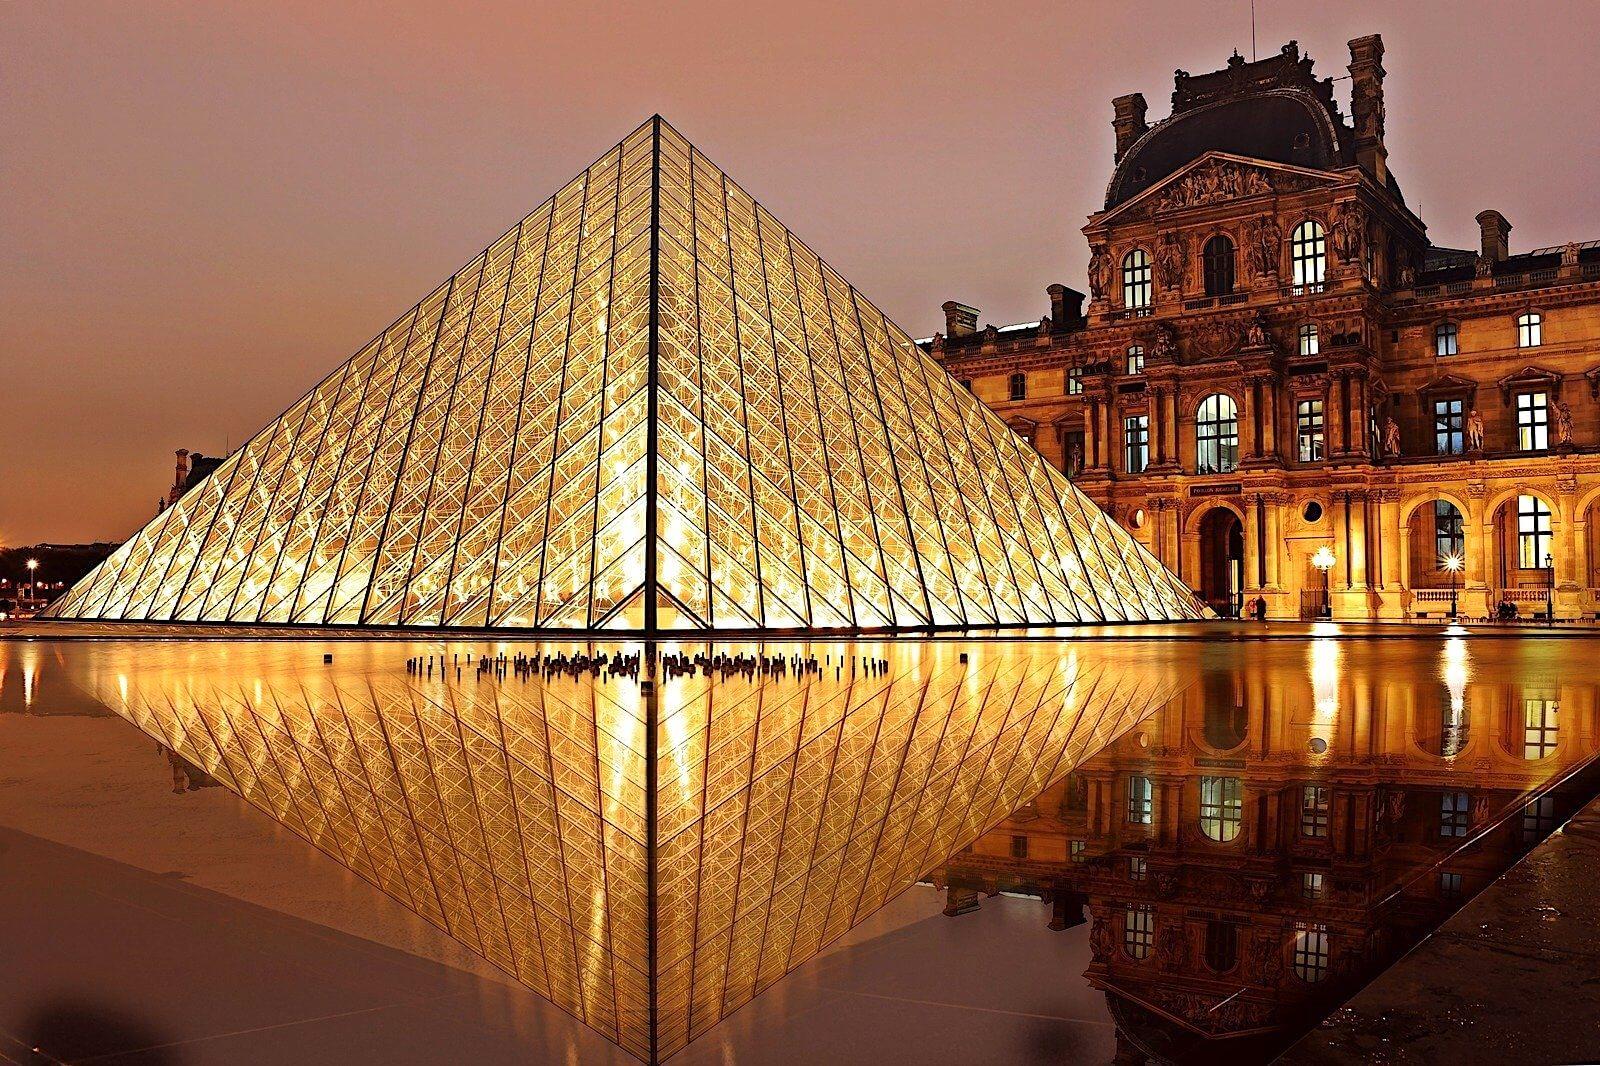 The Louvre in France light up at night.